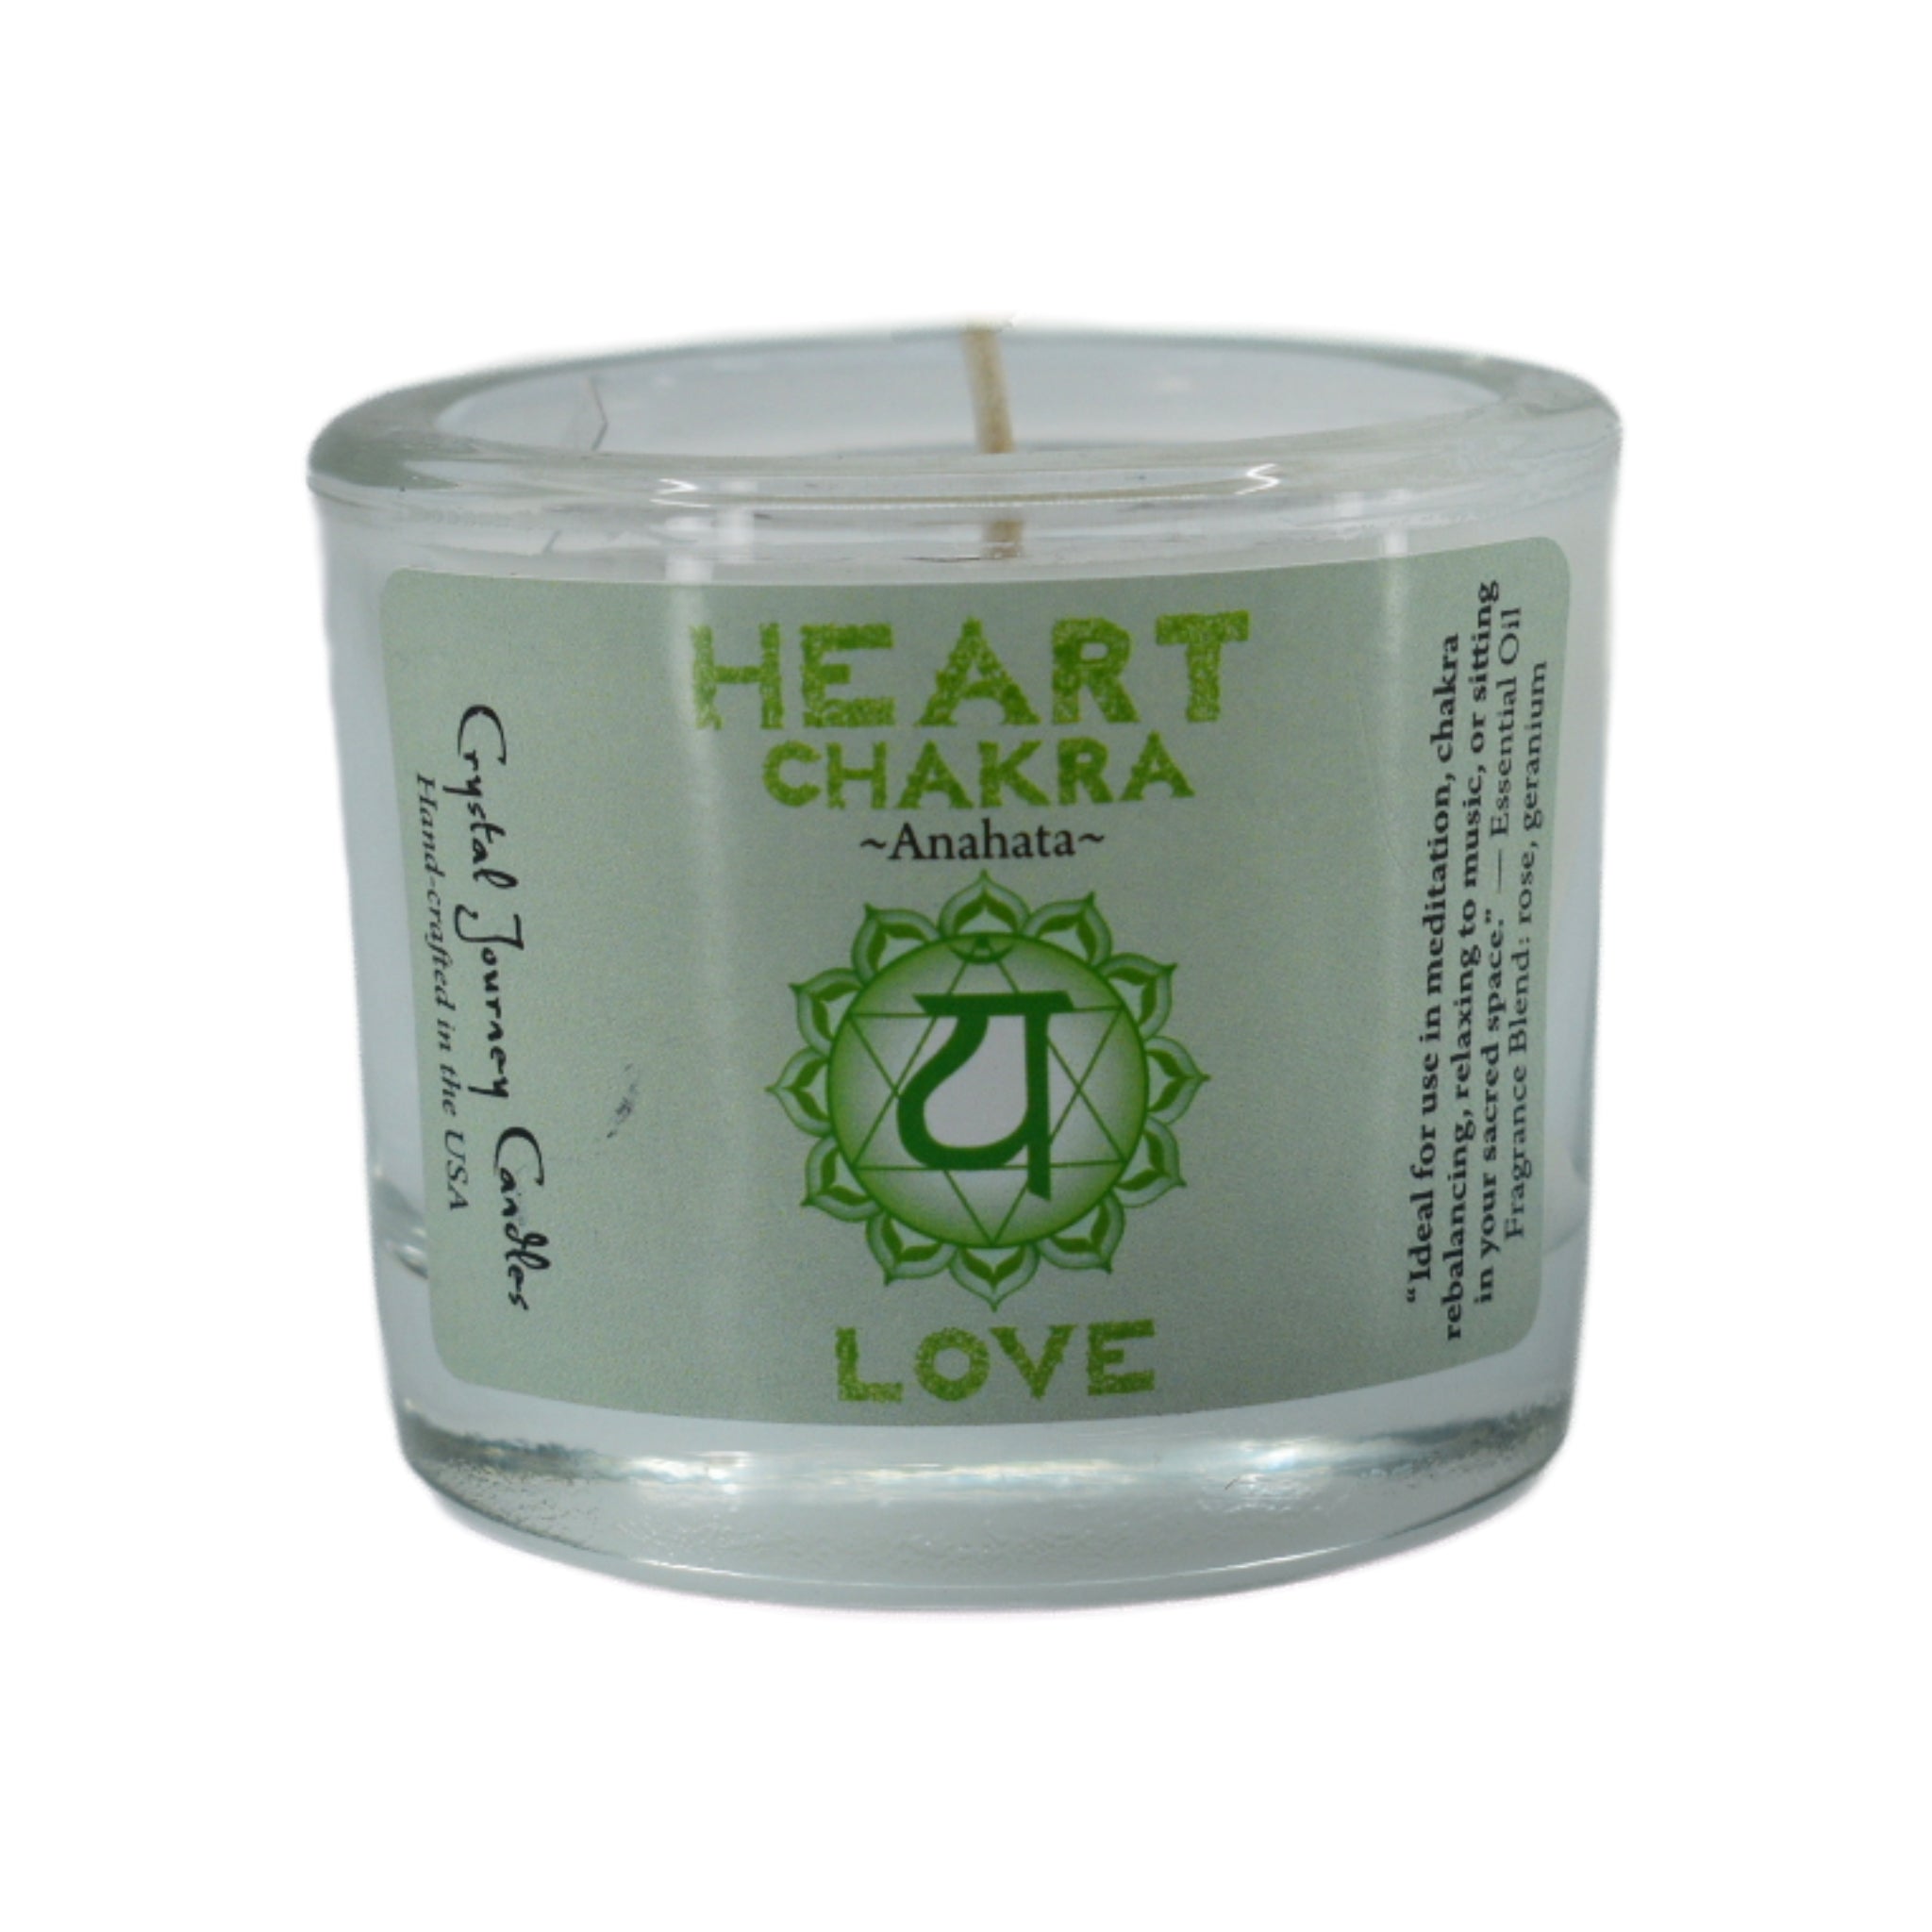 Heart Chakra Glass Votive Soy Candle.  The Heart Chakra includes the center of the chest.  It is associated with the heart, blood, upper back, lower lungs, breasts, circulation and skin.  The candle is white and scented with rose and geranium essentiol oils.  